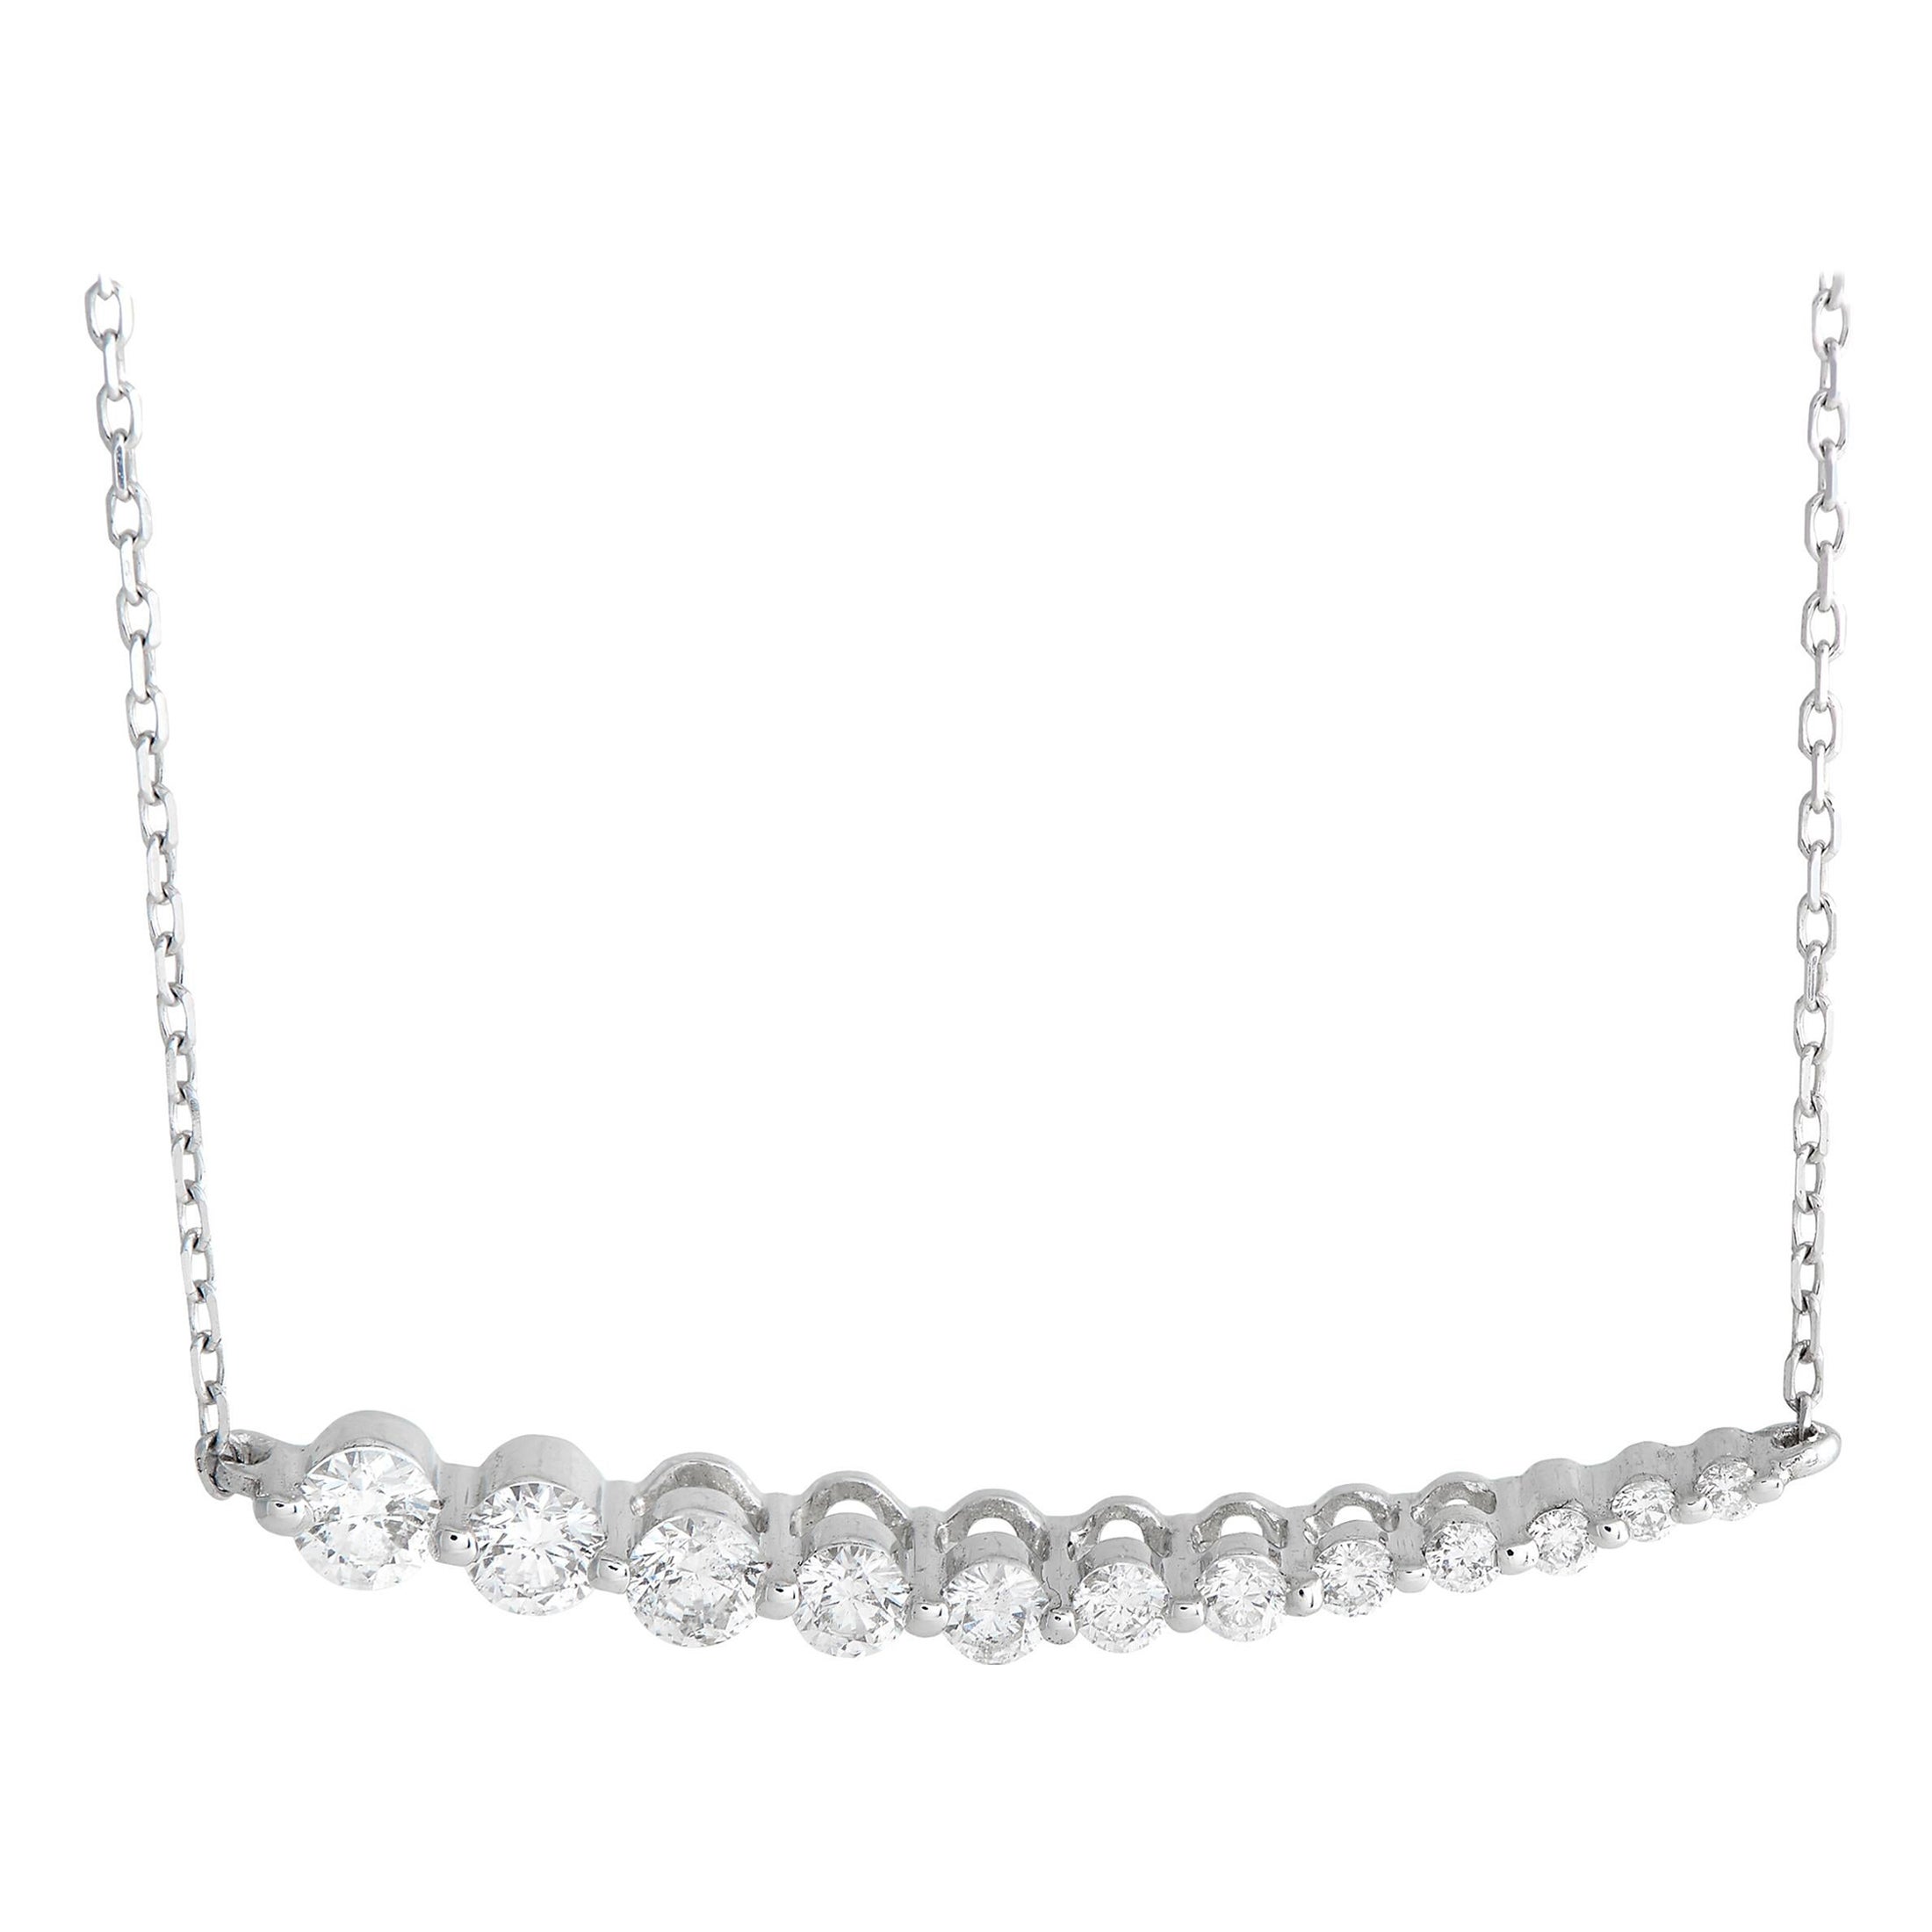 LB Exclusive 14K White Gold 0.50ct Diamond Tapered Row Necklace NK4-10257W For Sale